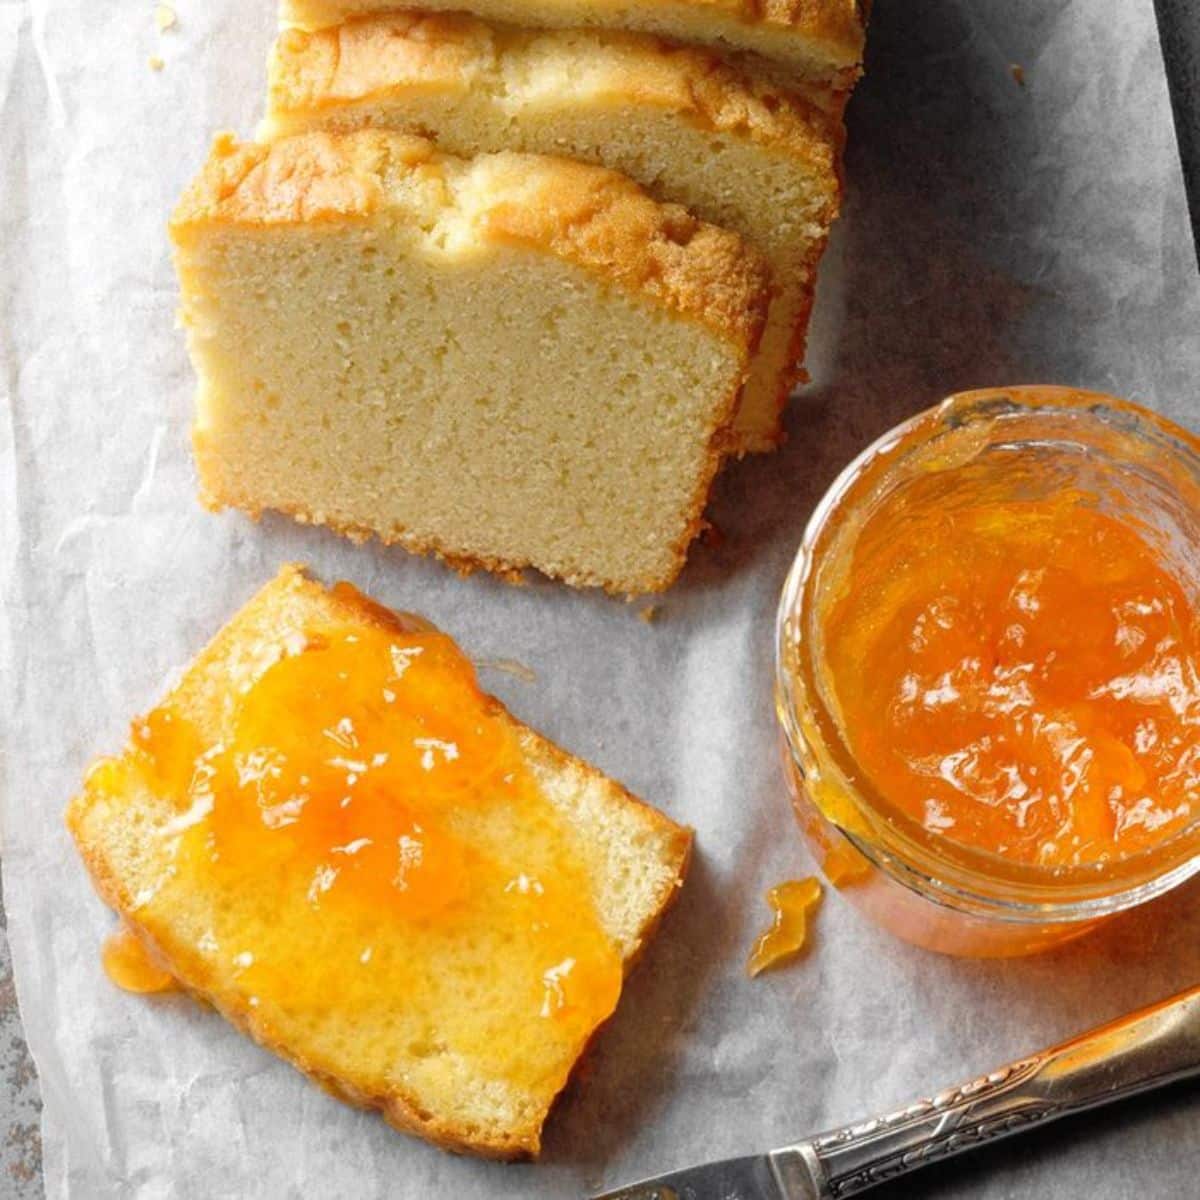 Apricot amaretto jam in a glass jar and on a slice of bread.